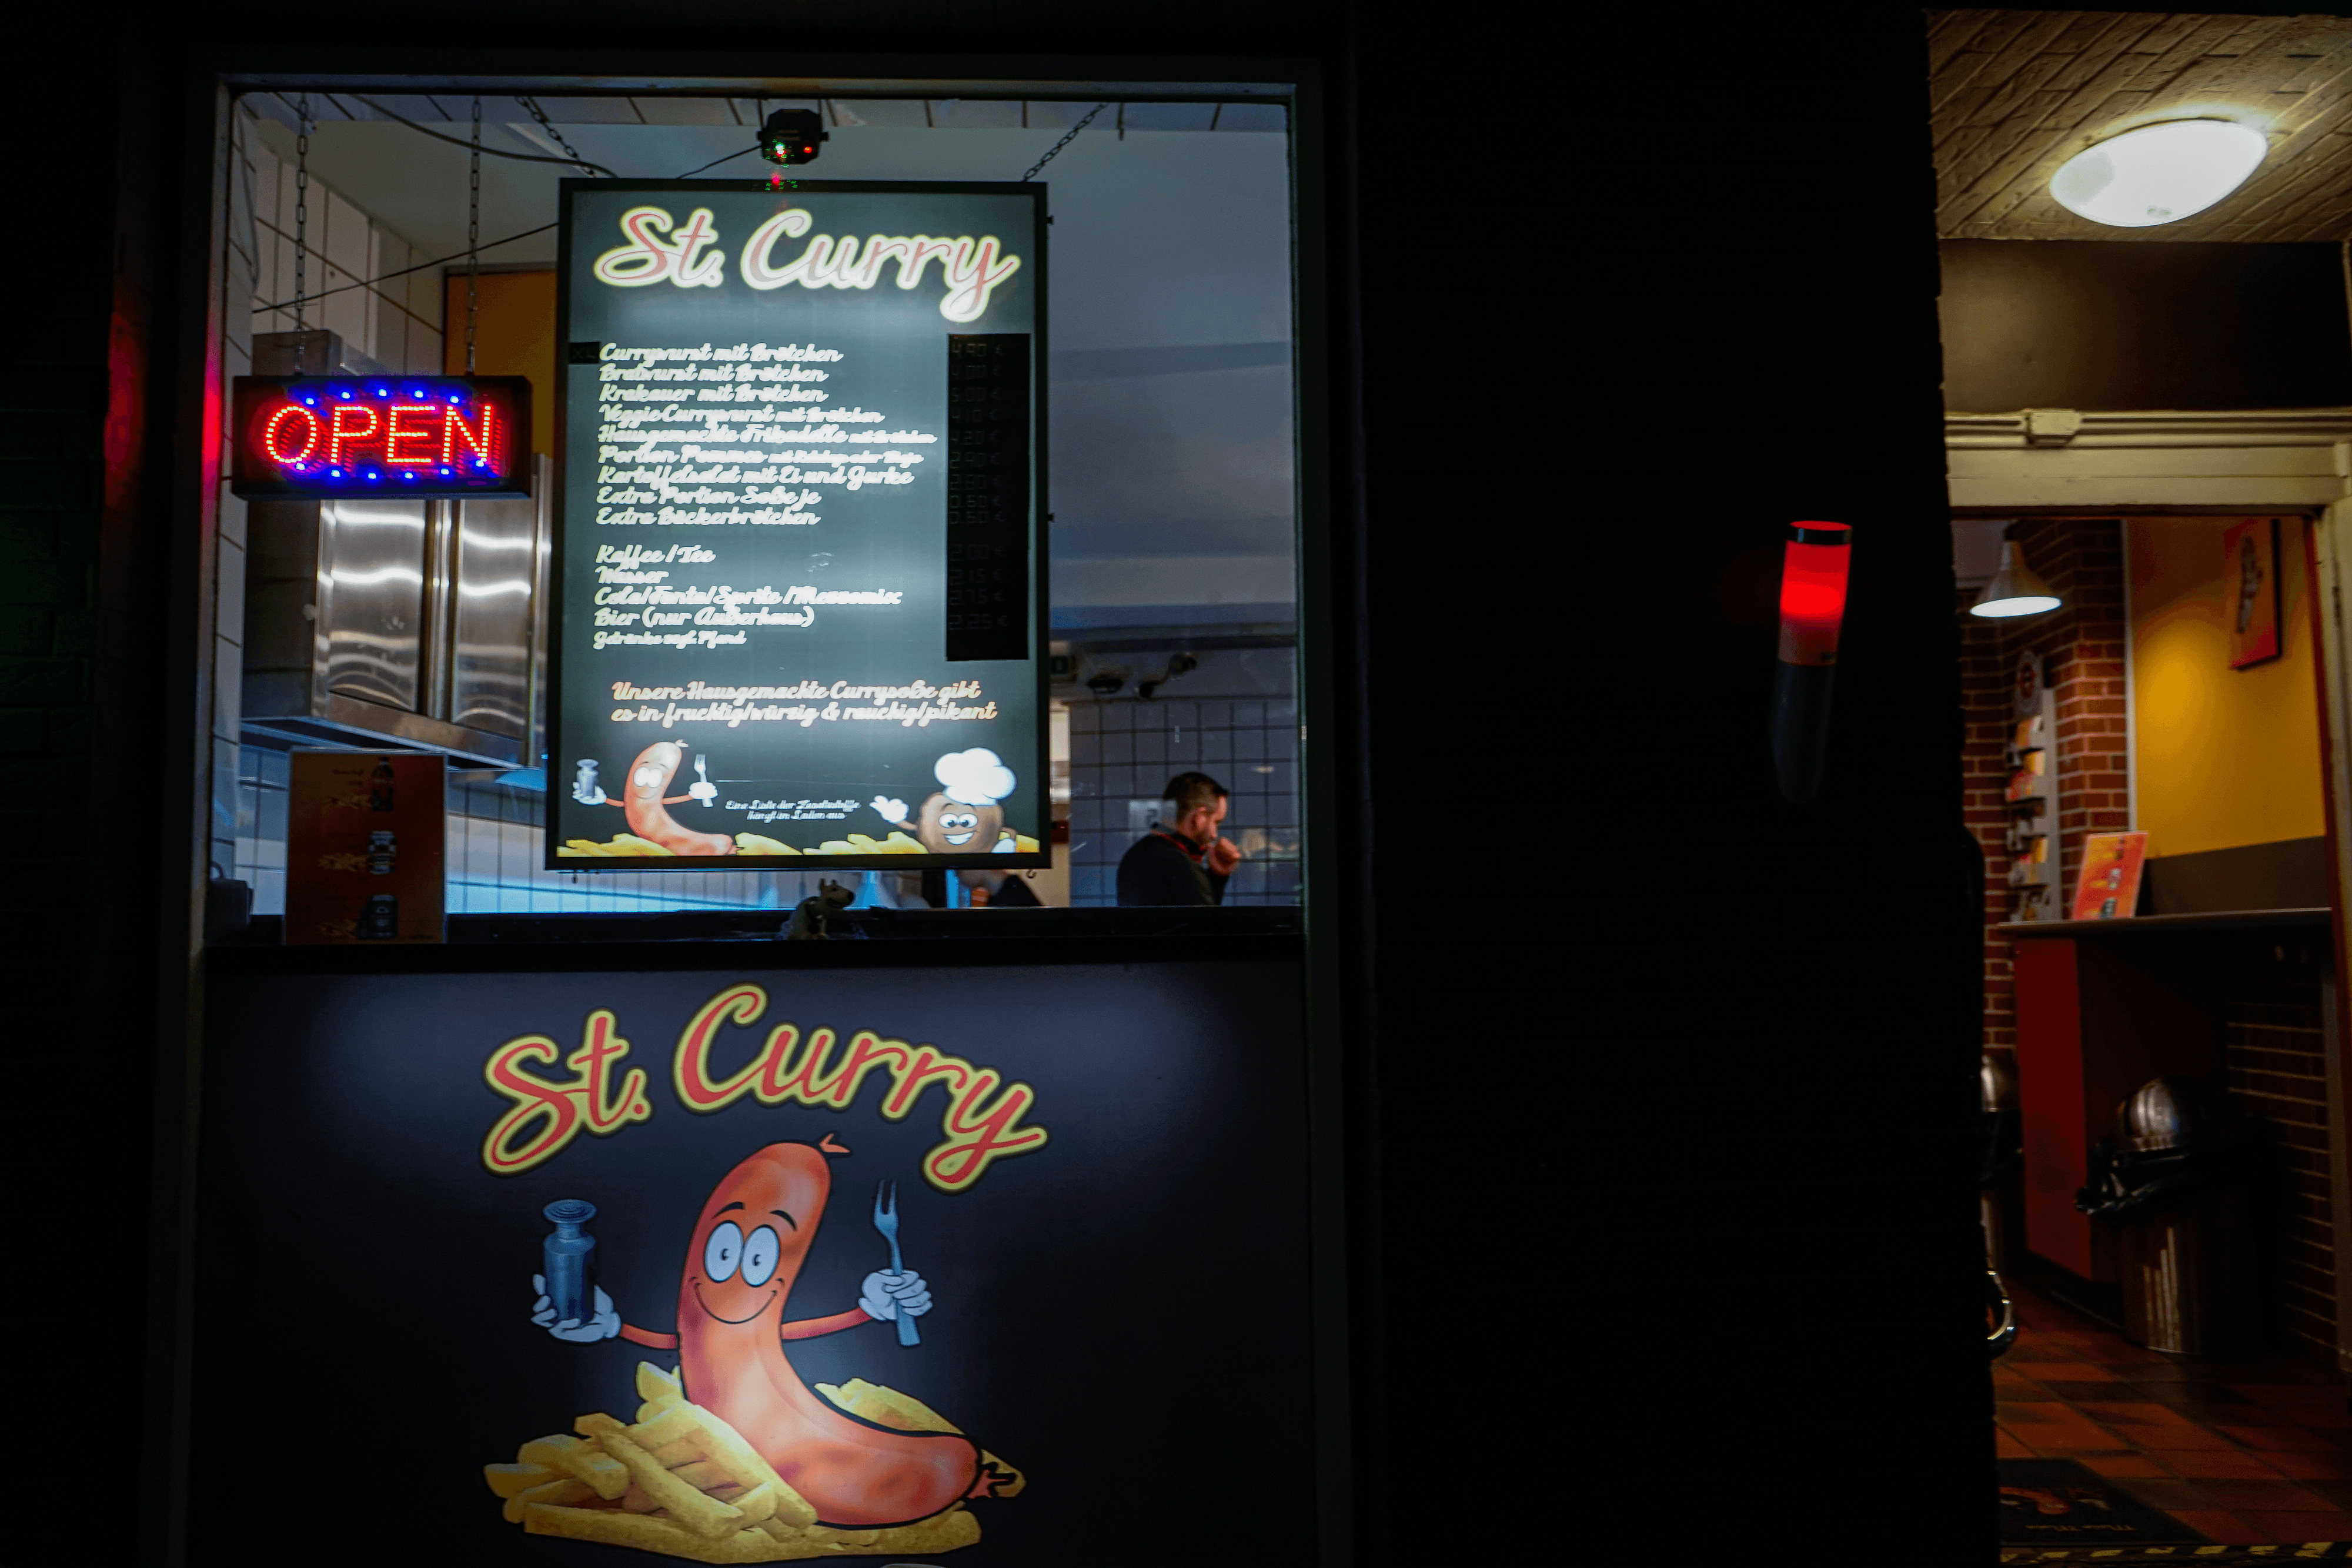 St. Curry